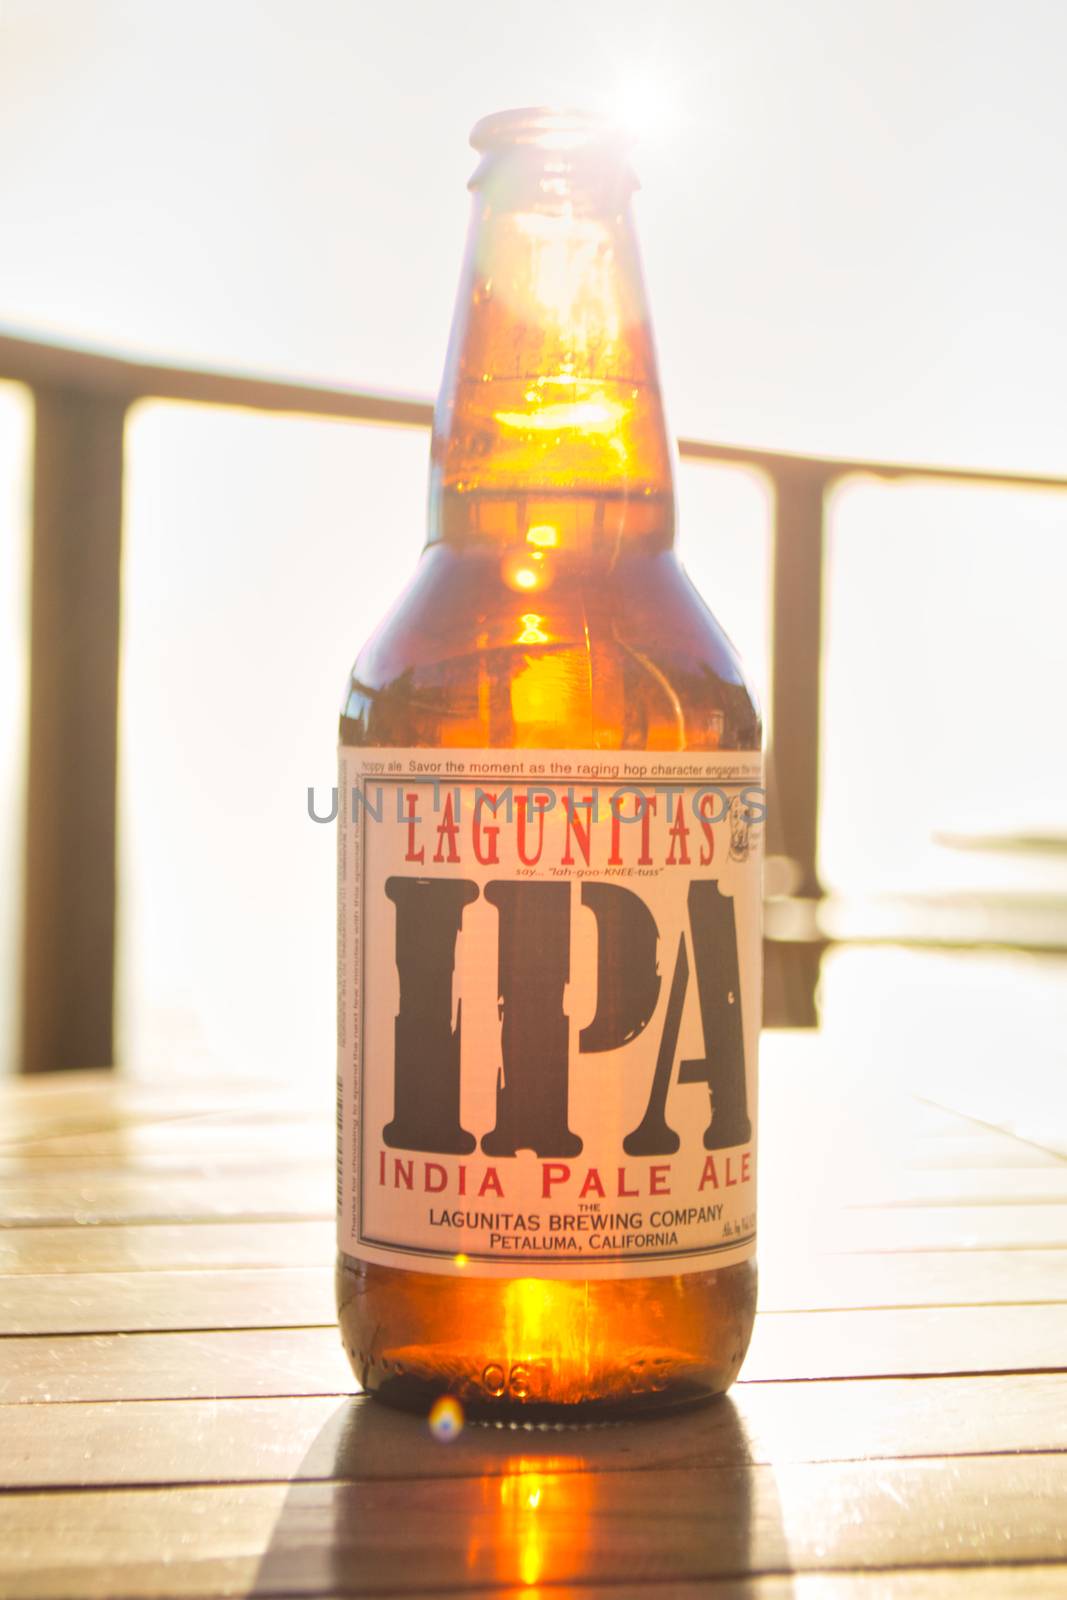 Lagunitas IPA India Pale Ale beer bottle against strong sunlight. Wooden table. by kb79